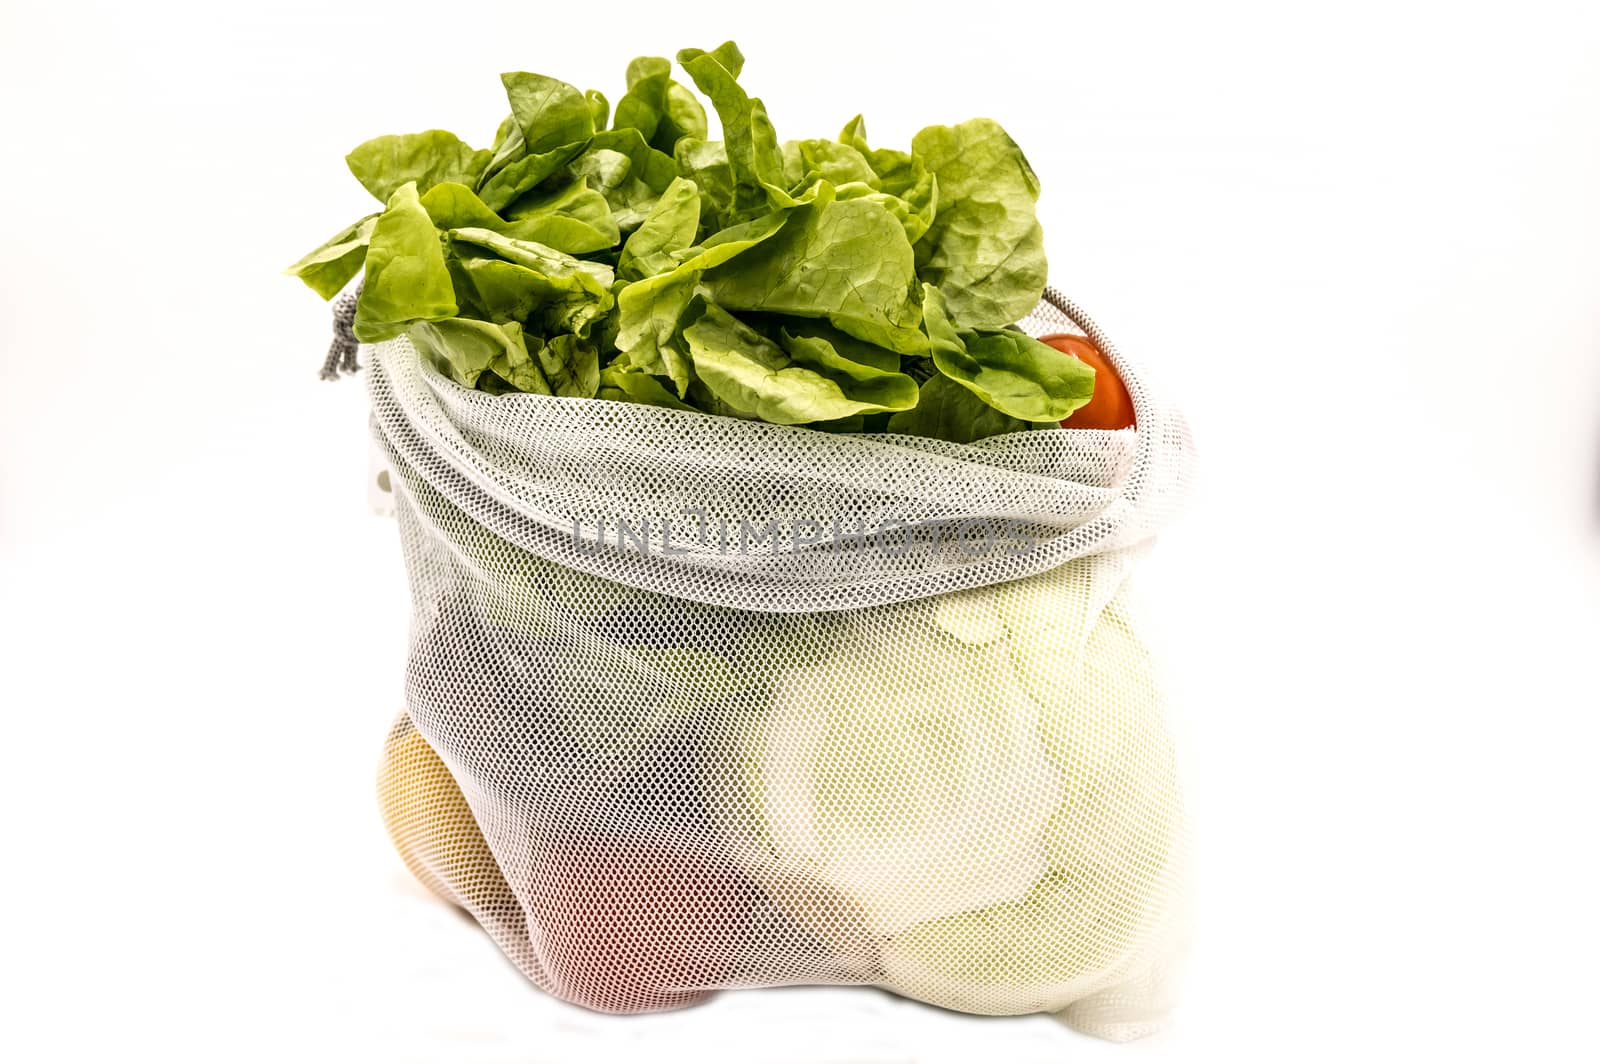 A profile view of vegetables and fruits in a reusable mesh bag on a white background